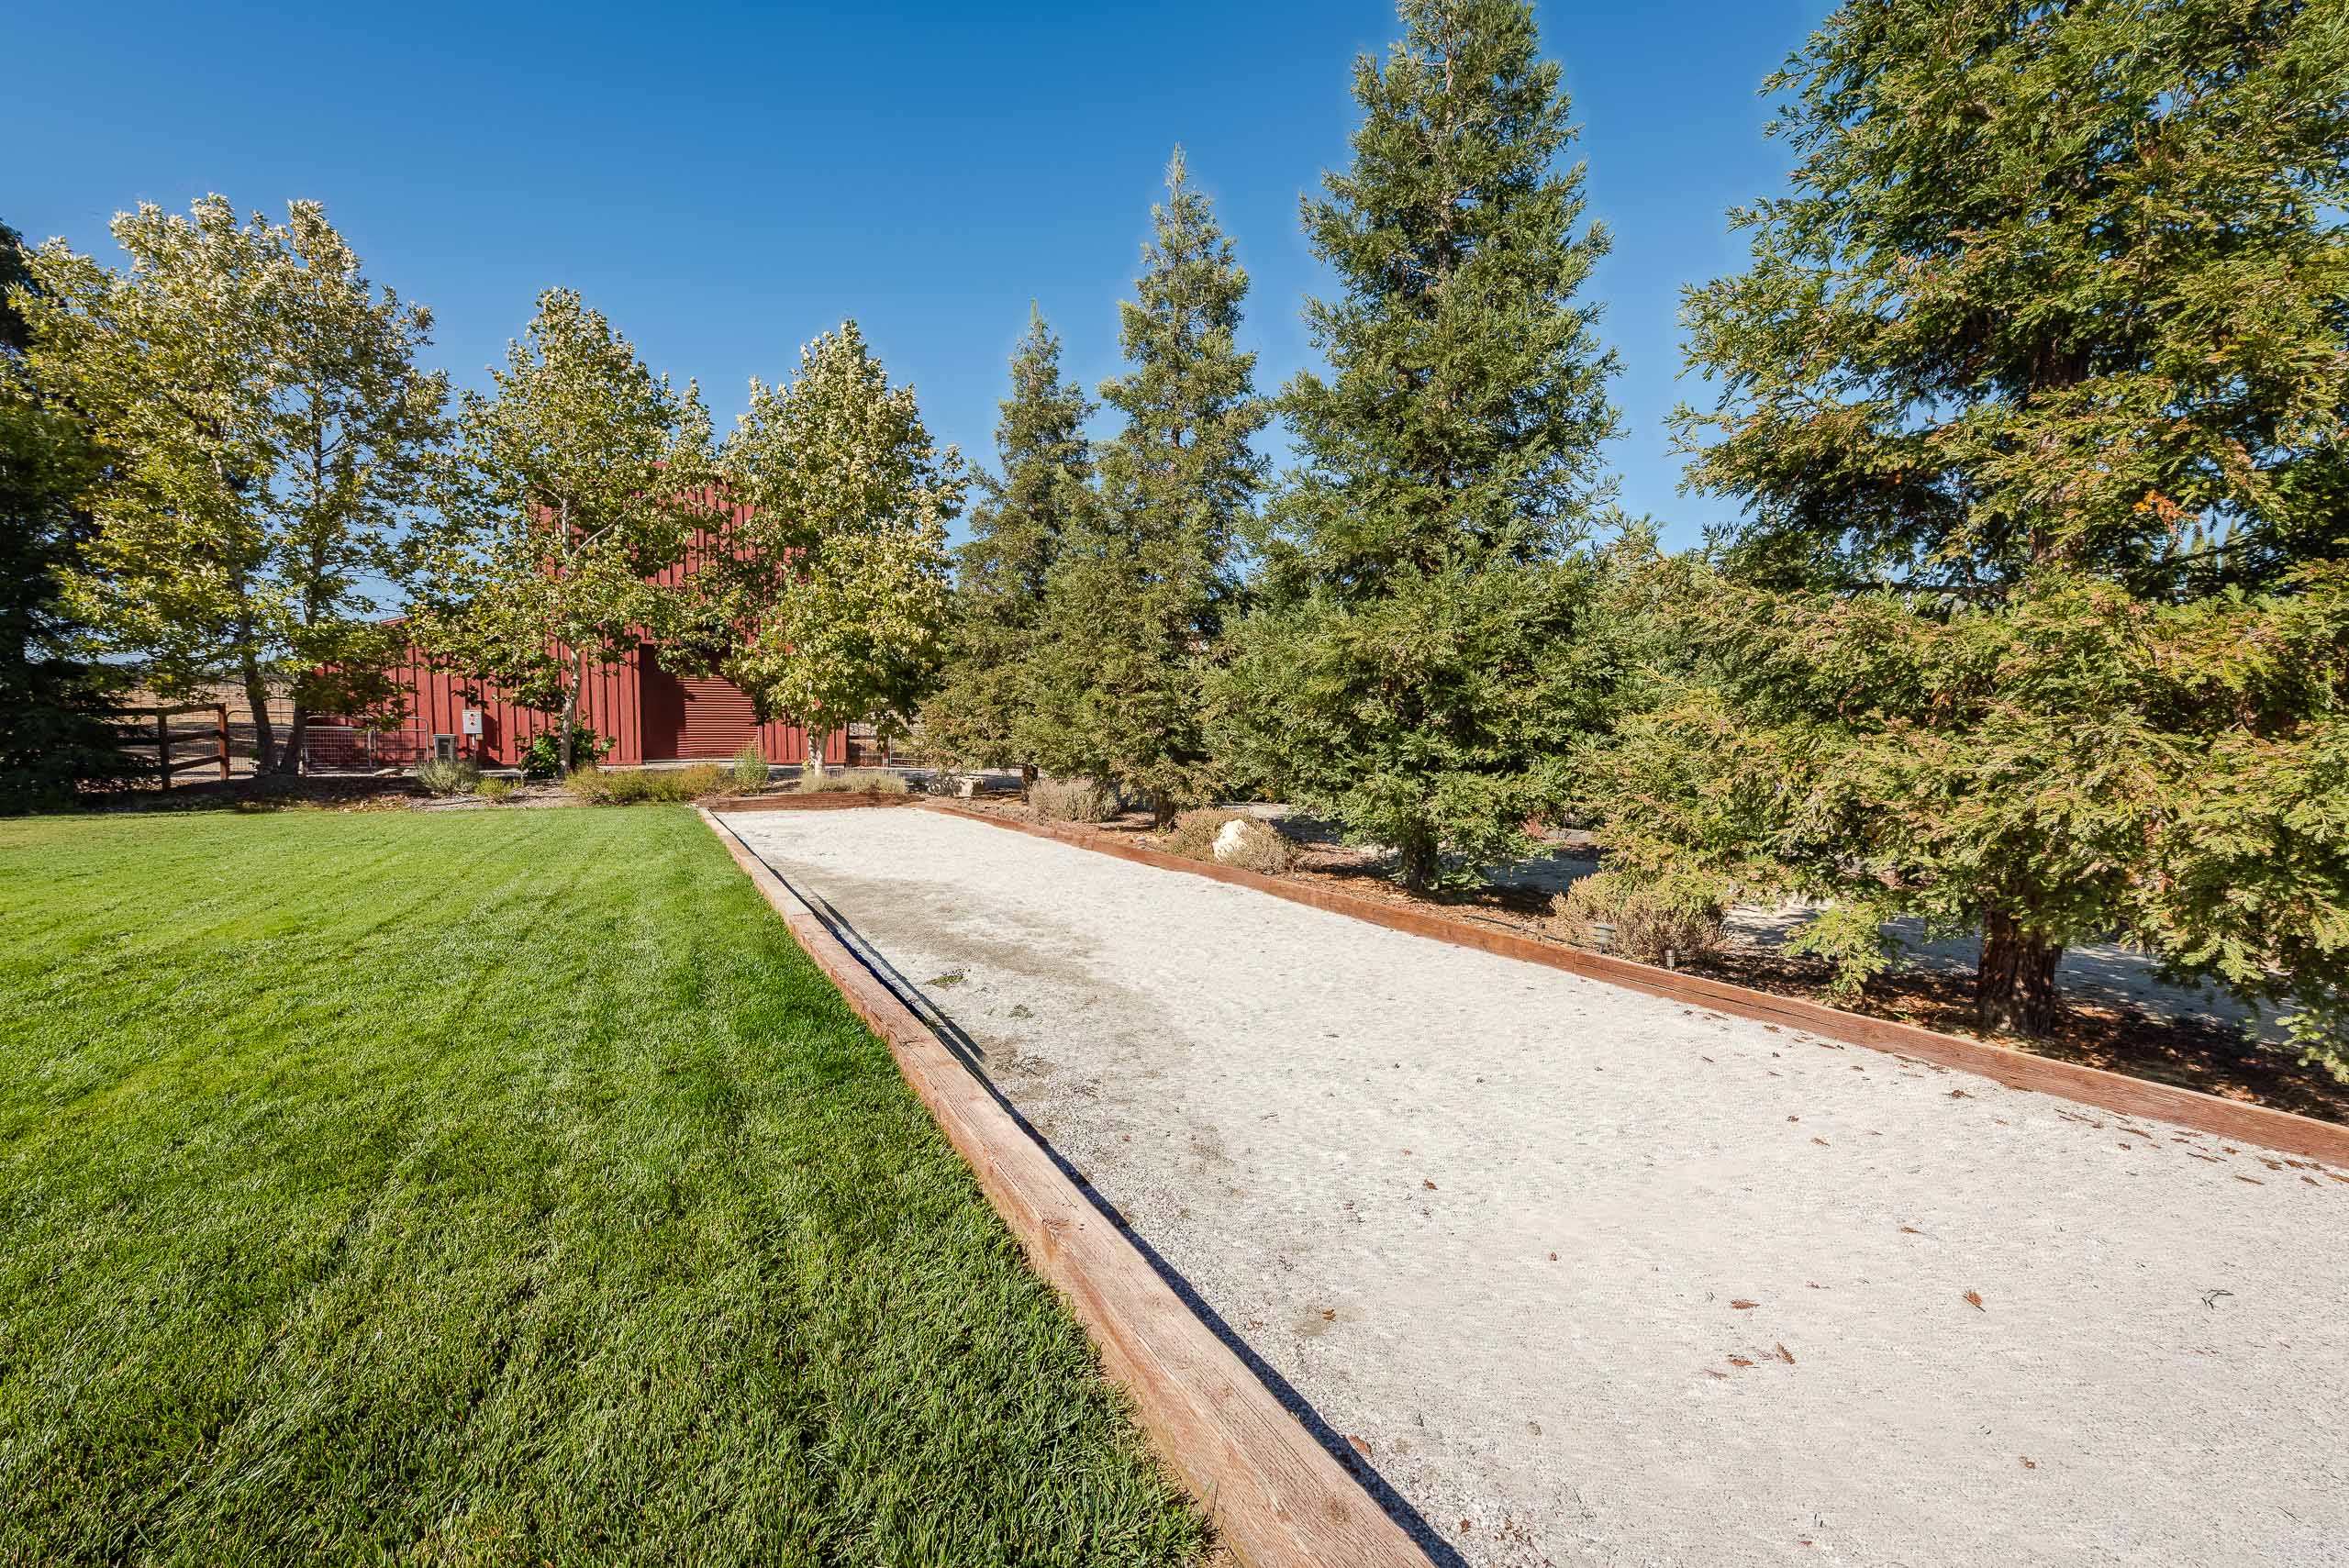 bocce court outside